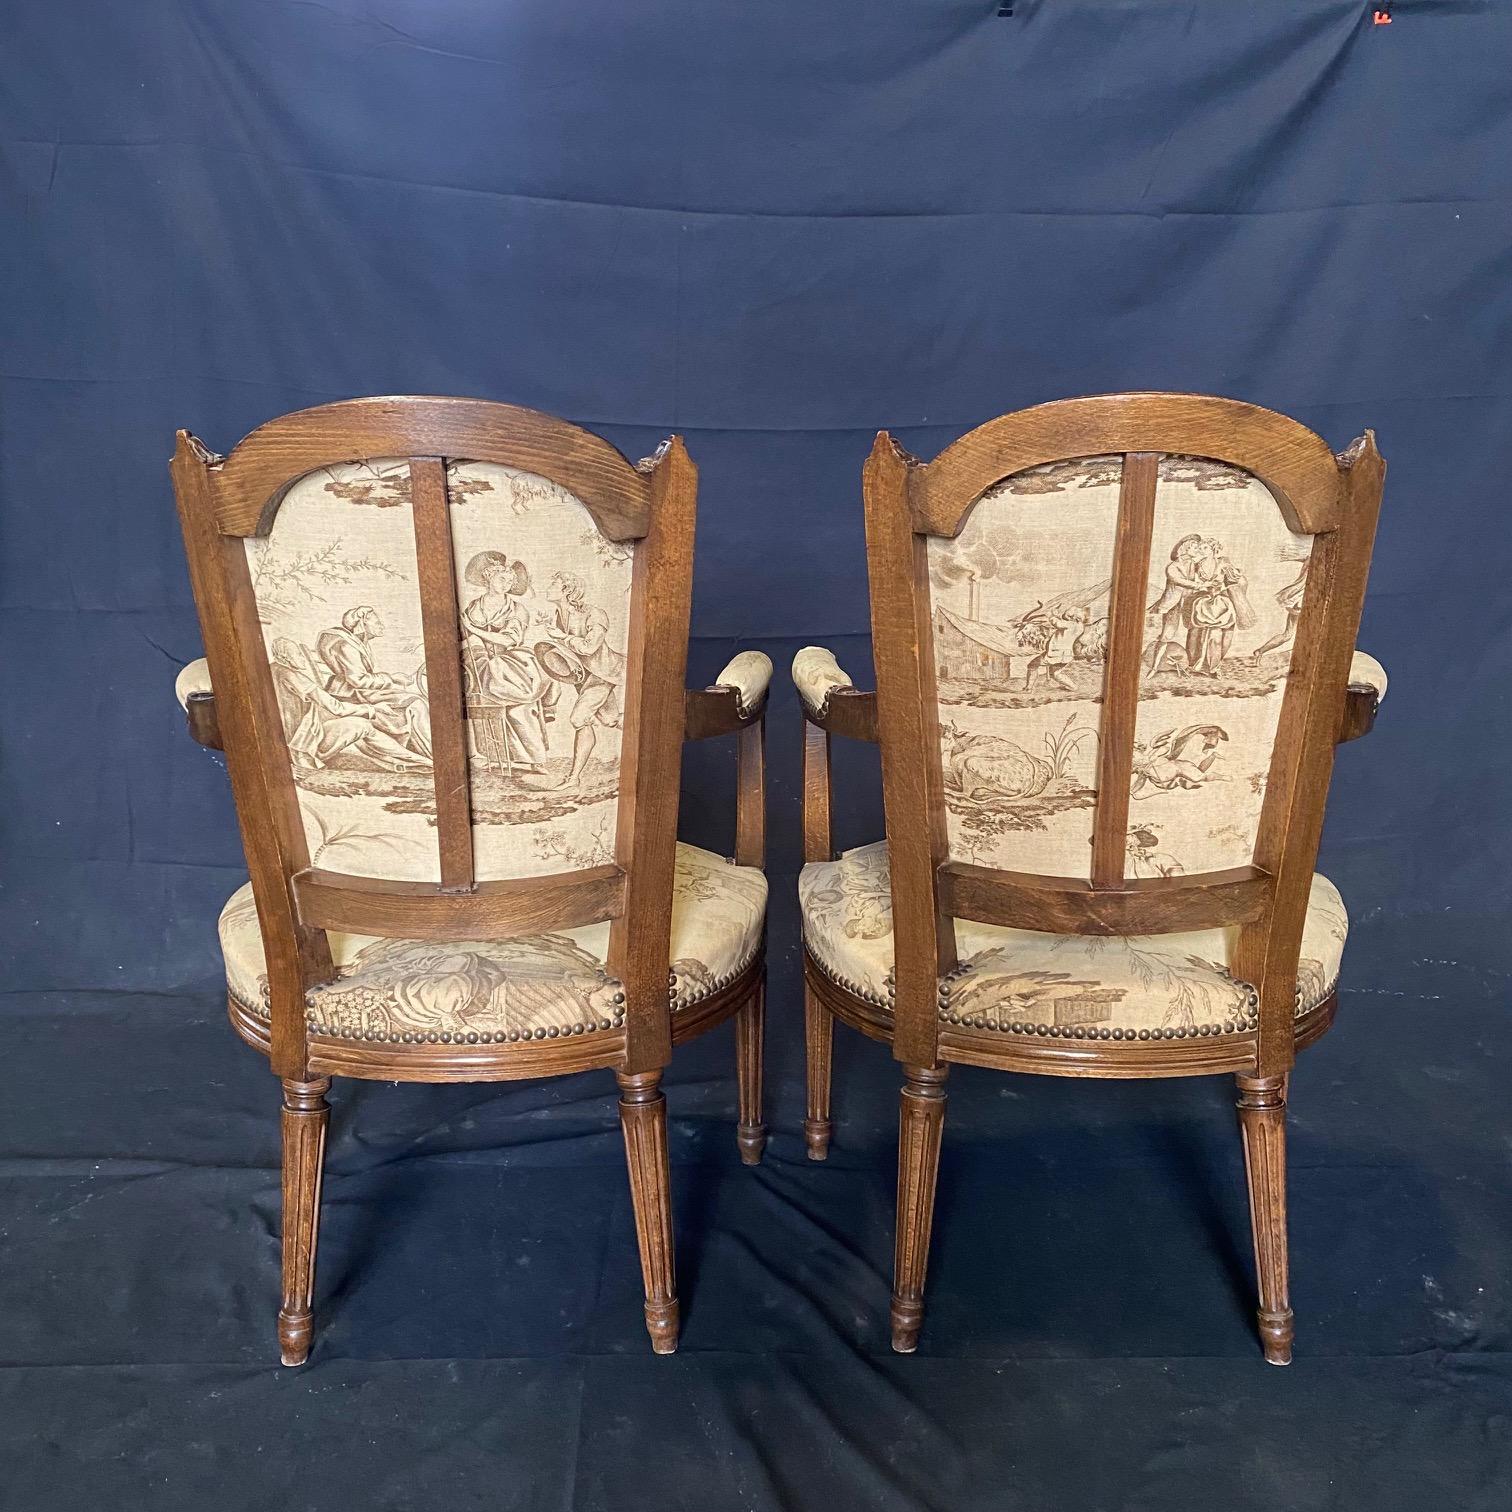  Pair of French 19th Century Walnut & Toile Louis XVI Fauteuils  In Good Condition For Sale In Hopewell, NJ